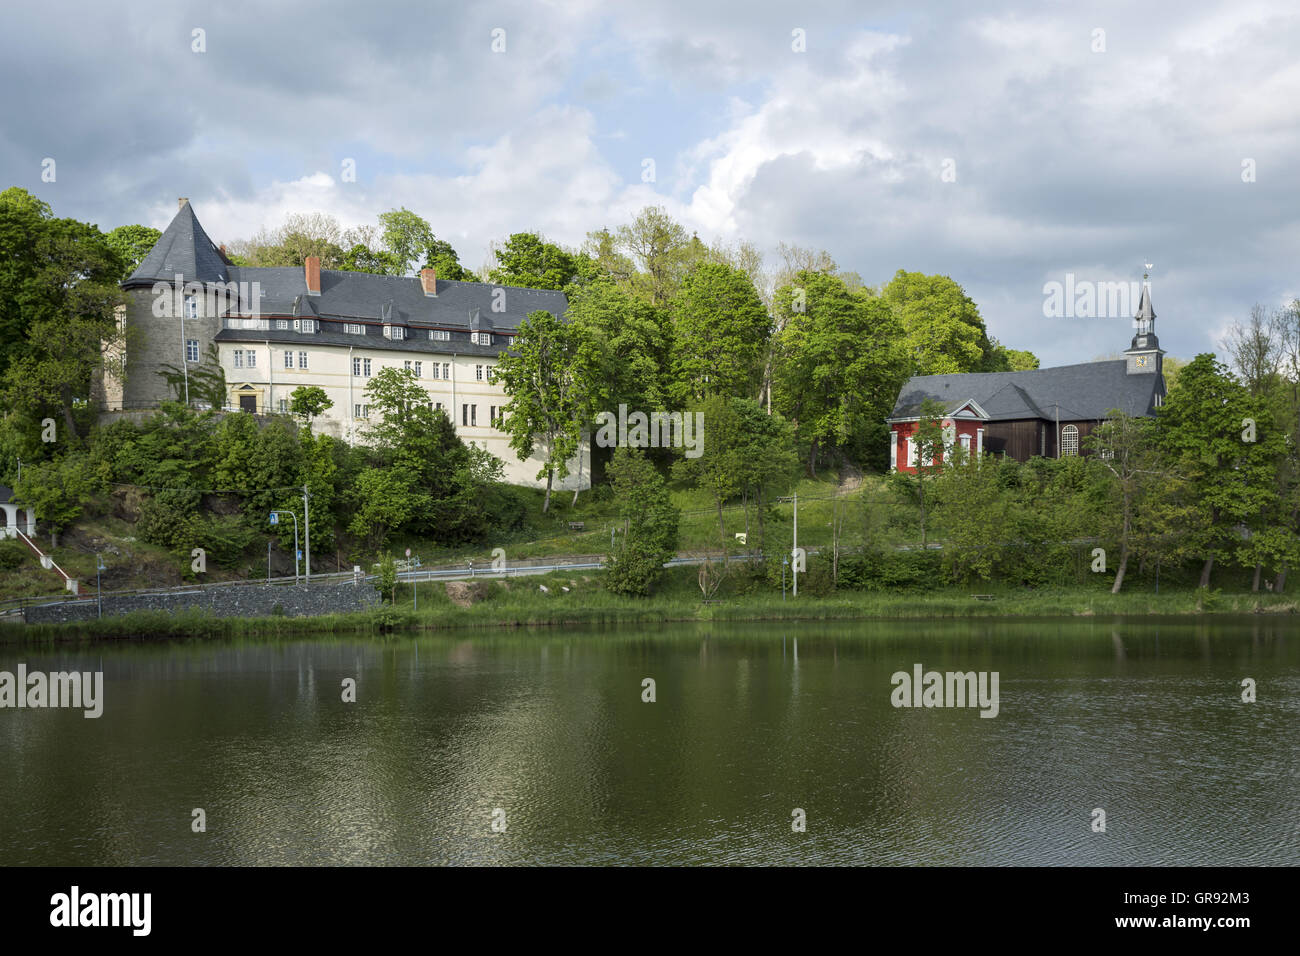 Castle And Church At The Bottom Of The Pond In Stiege, Harz, Saxony-Anhalt, Germany, Europe Stock Photo